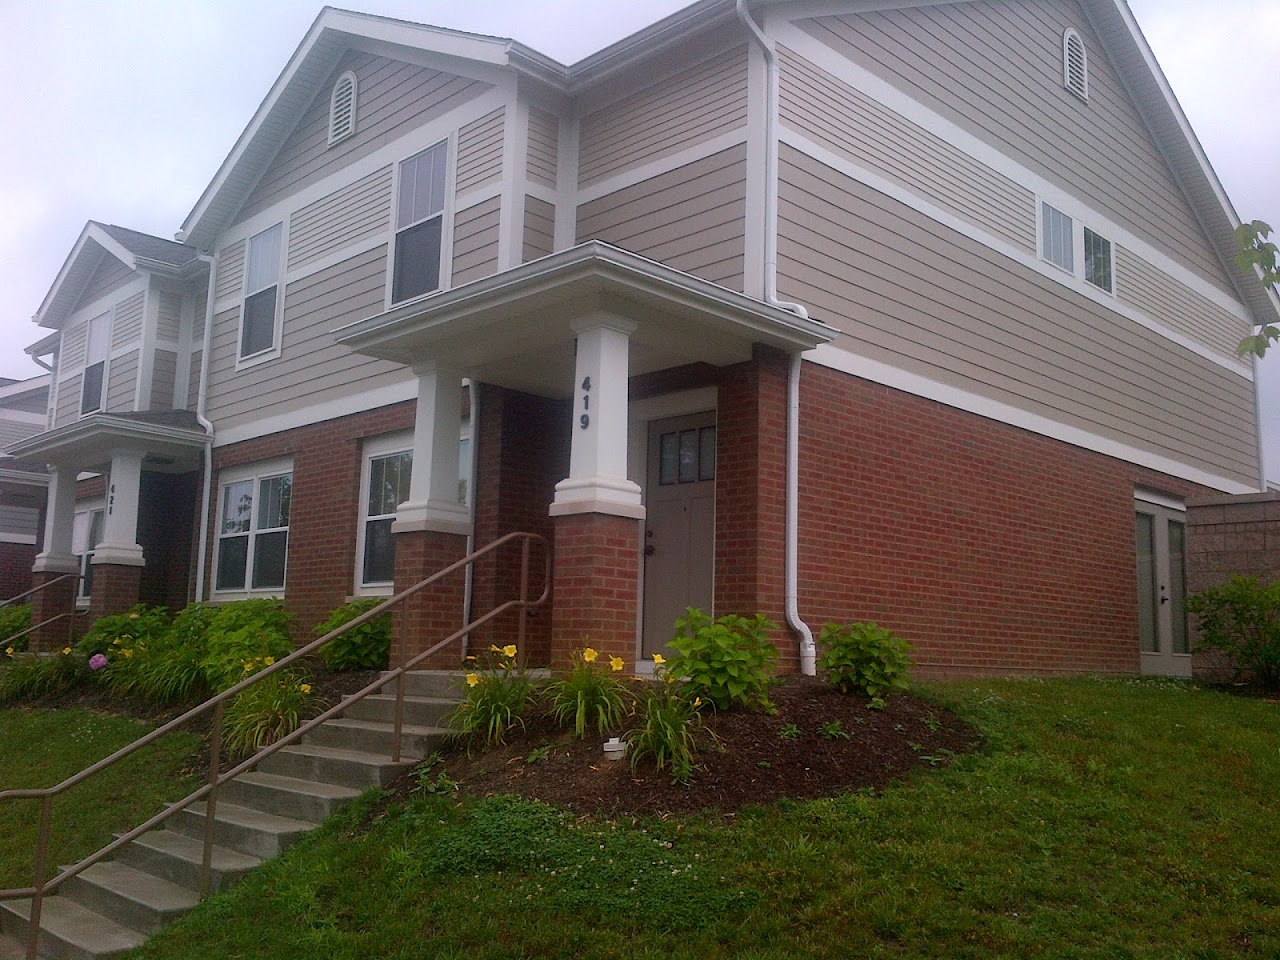 Photo of EDGEWOOD VILLAGE IV. Affordable housing located at 491 VERNON ODOM BLVD AKRON, OH 44307